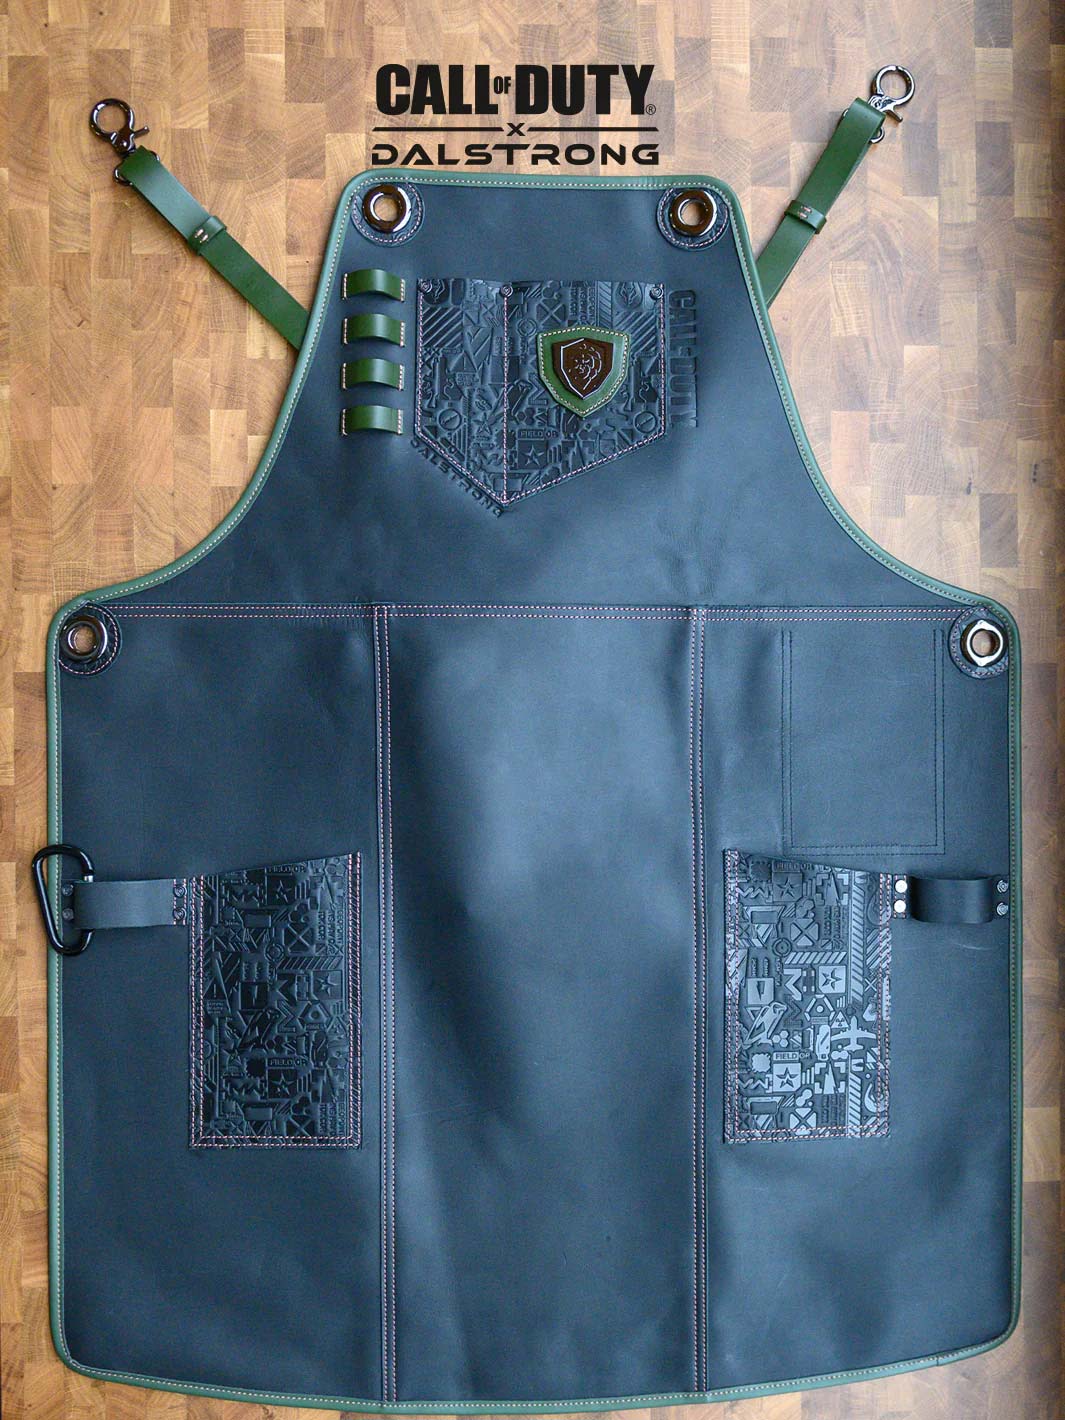 Limited Edition Chef Leather Apron | Call of Duty © Edition | Black Genuine Leather | EXCLUSIVE COLLECTOR SET | Dalstrong ©